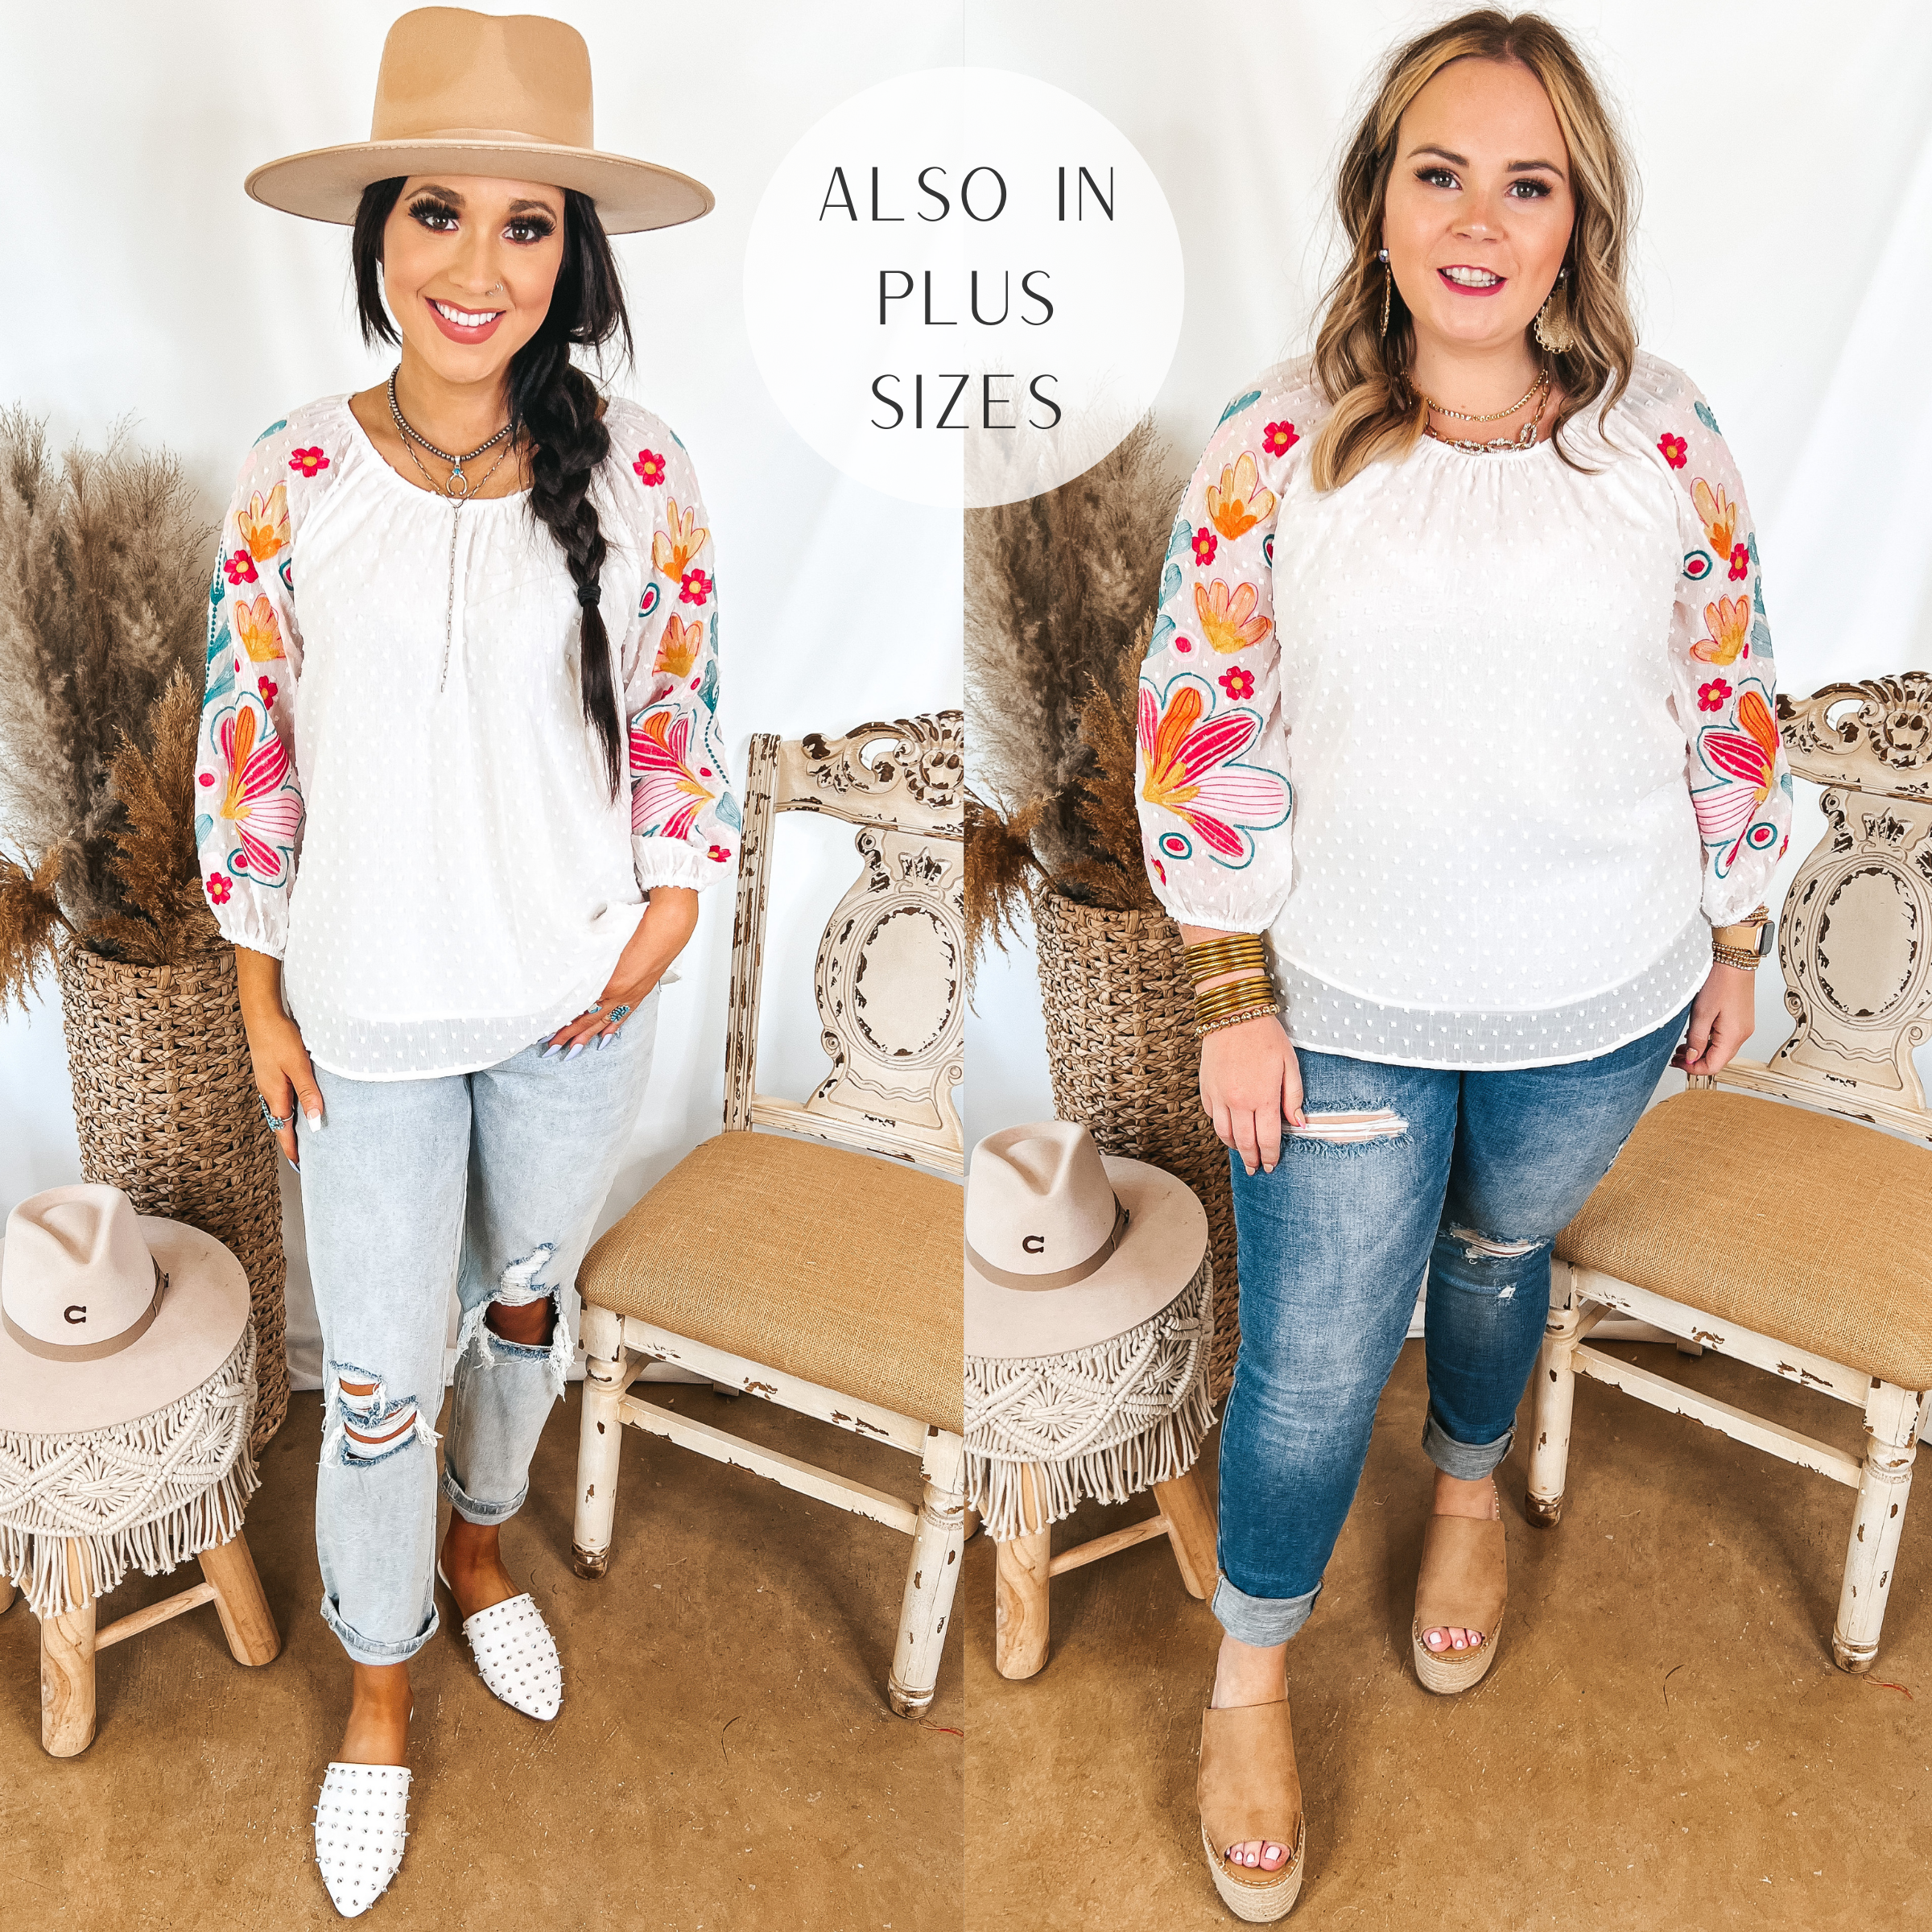 Models are wearing a swiss dot blouse that has floral embroidery on the sleeves. Size small model has it paired with light wash boyfriend jeans, a tan hat, and white mules. Size large model has it paired with distressed skinny jeans, tan wedges, and gold jewelry.